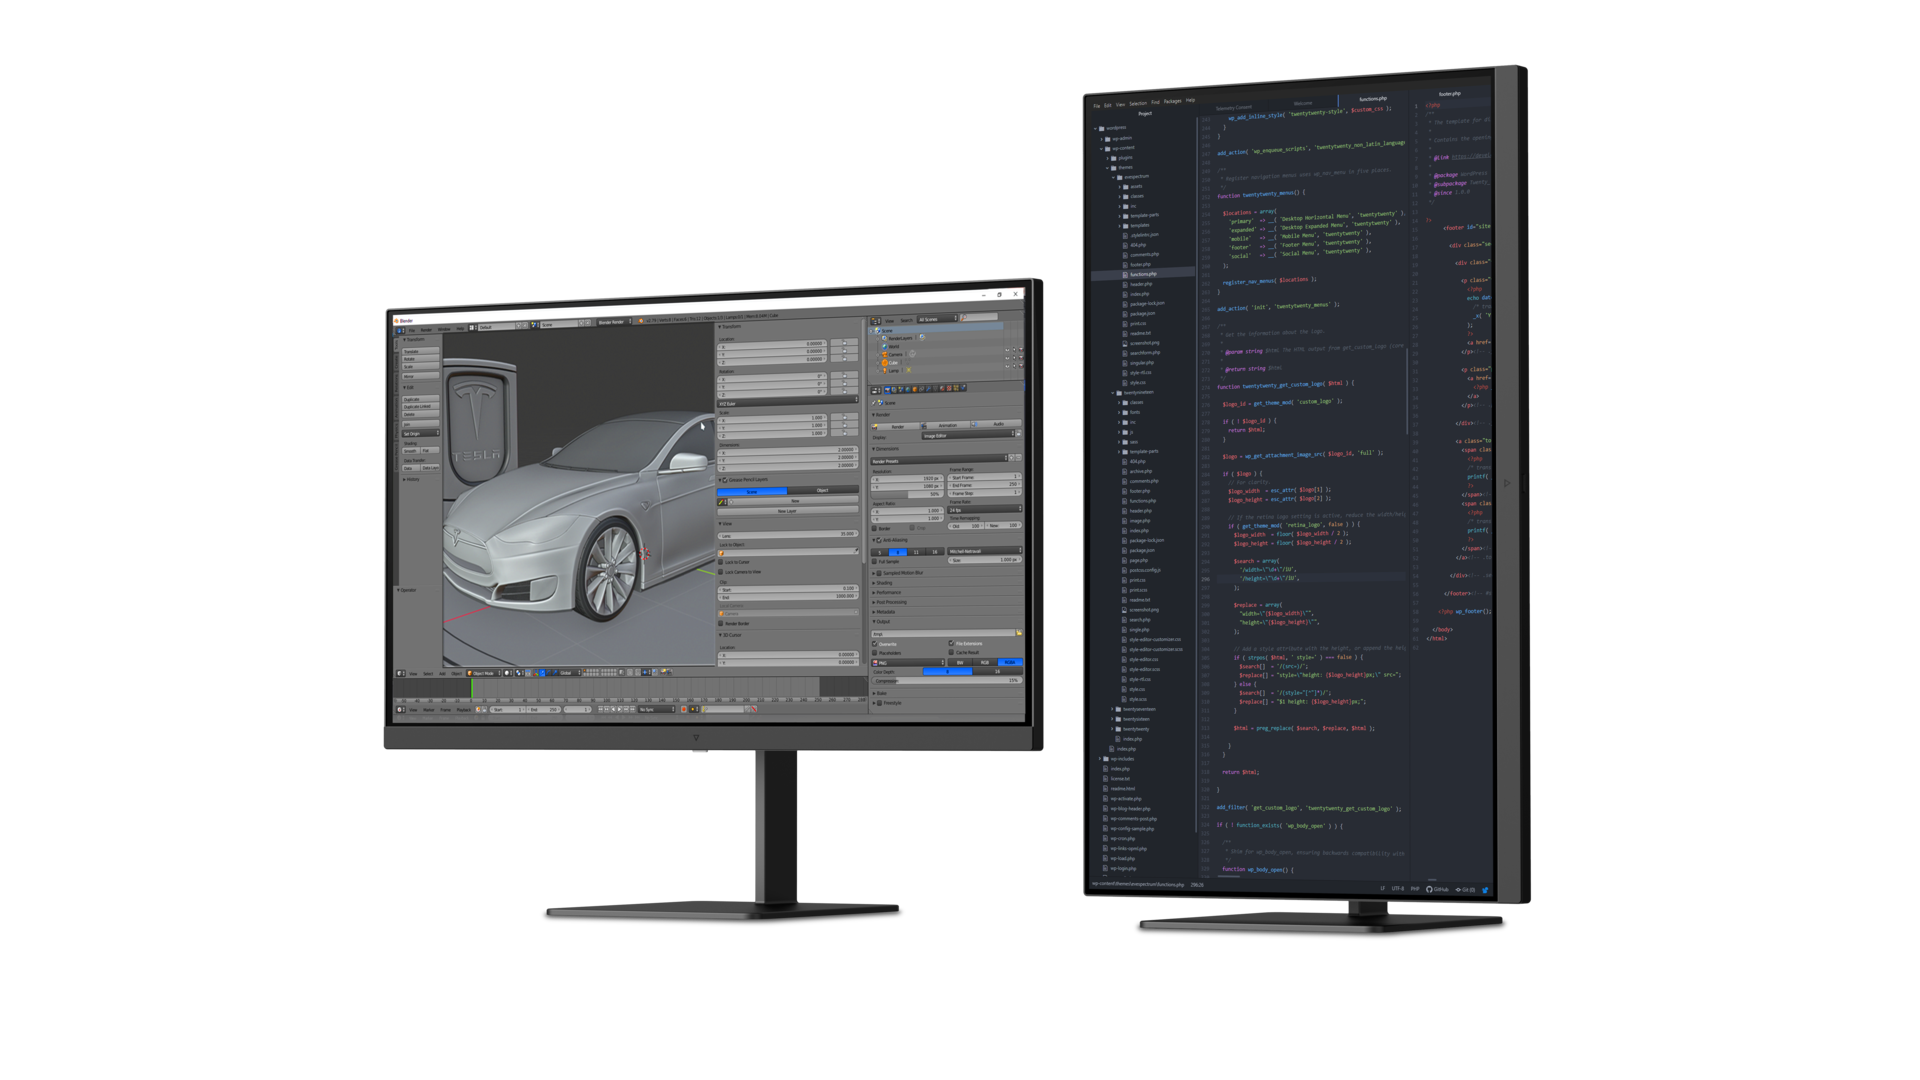 Eve announces Spectrum, the world's first 1440p 240 Hz IPS gaming monitor -   News